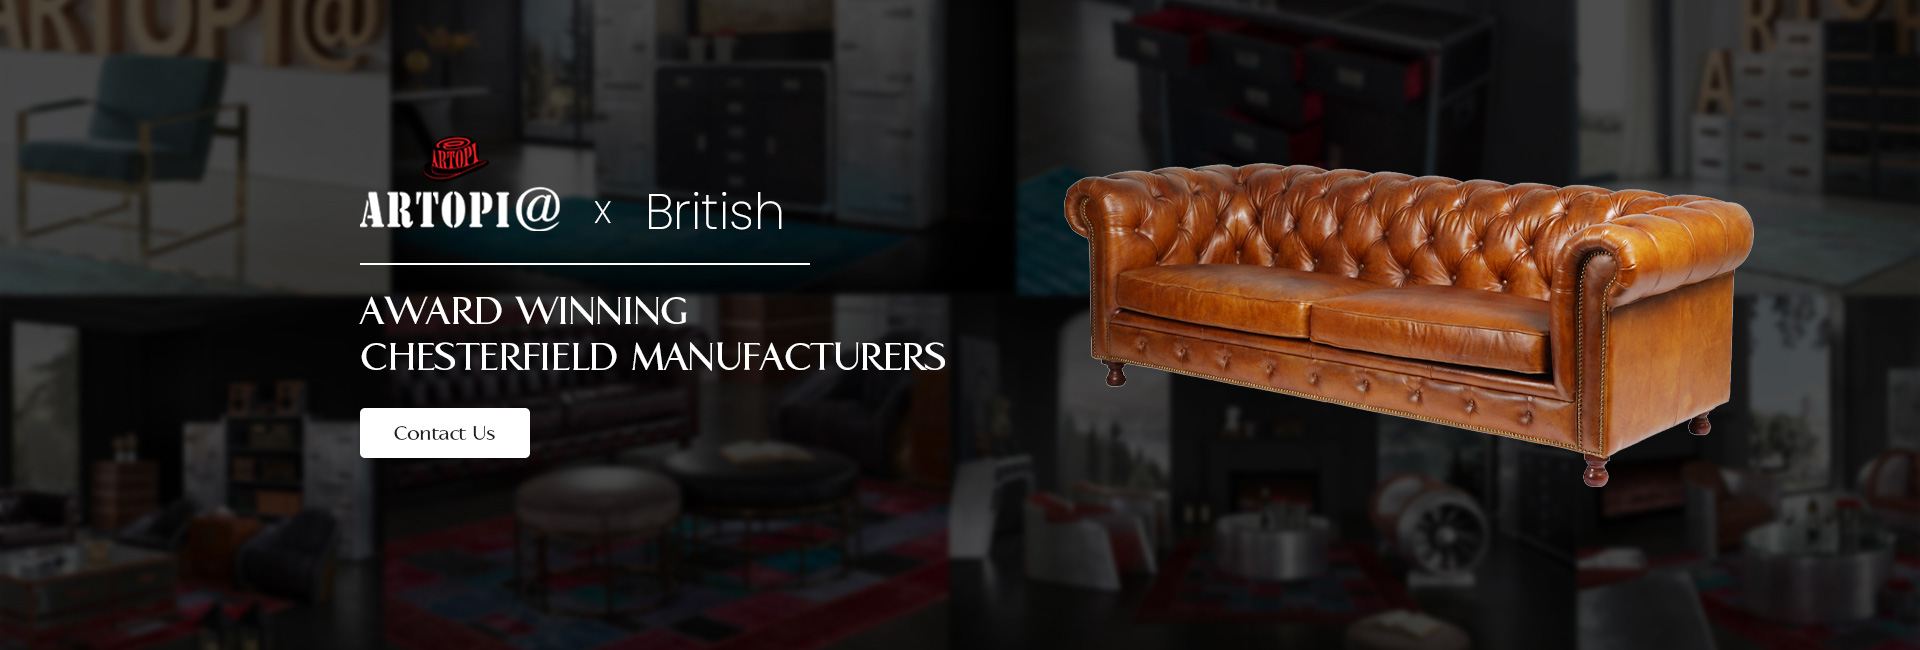 Chesterfield sofa manufacturer